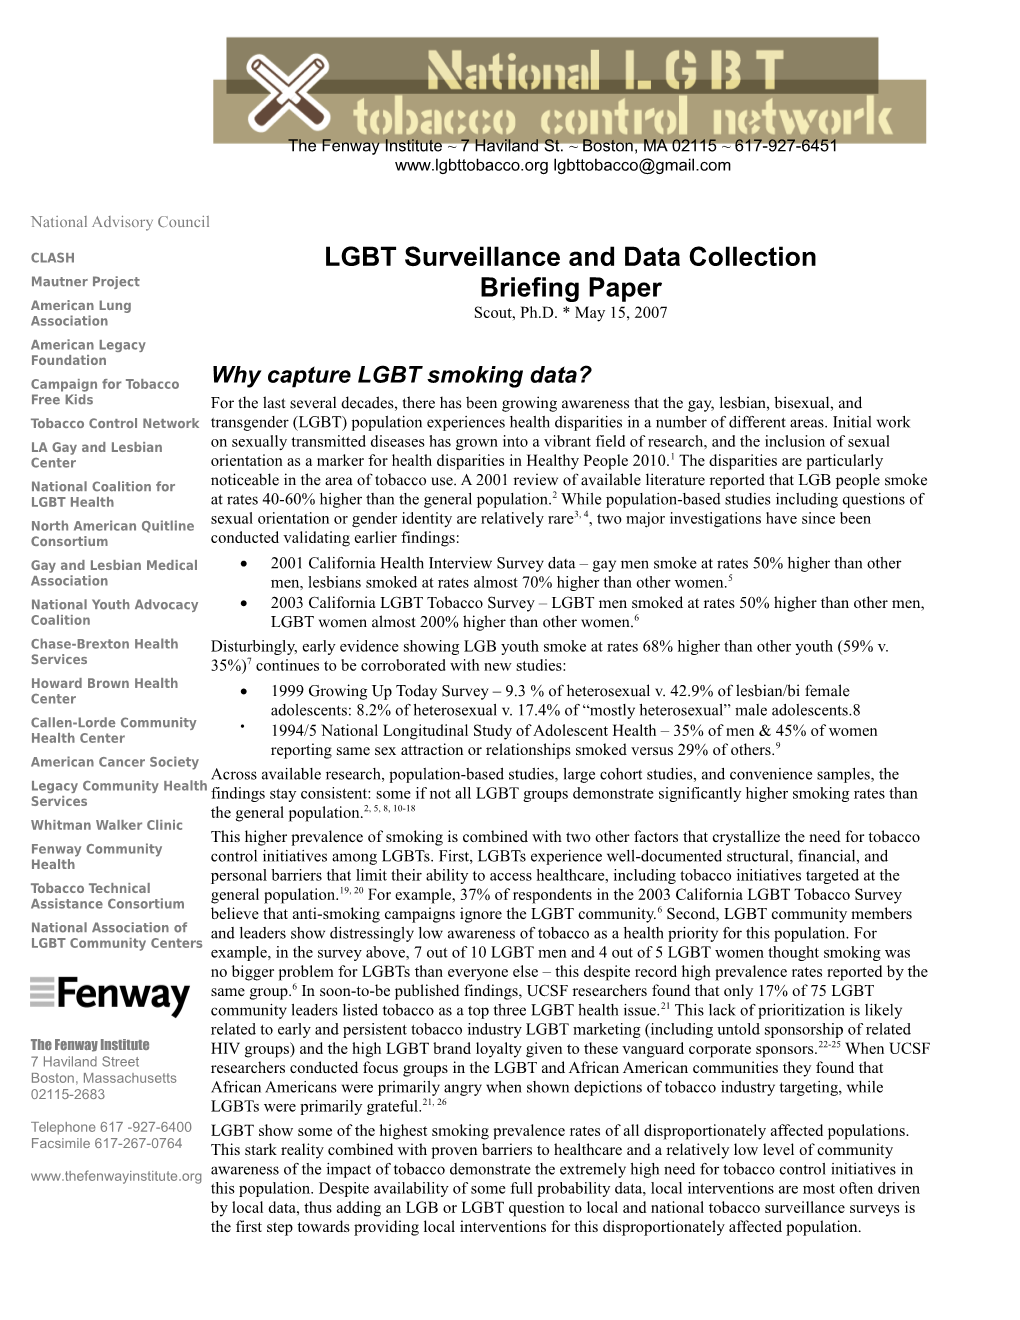 LGBT Surveillance and Data Collection